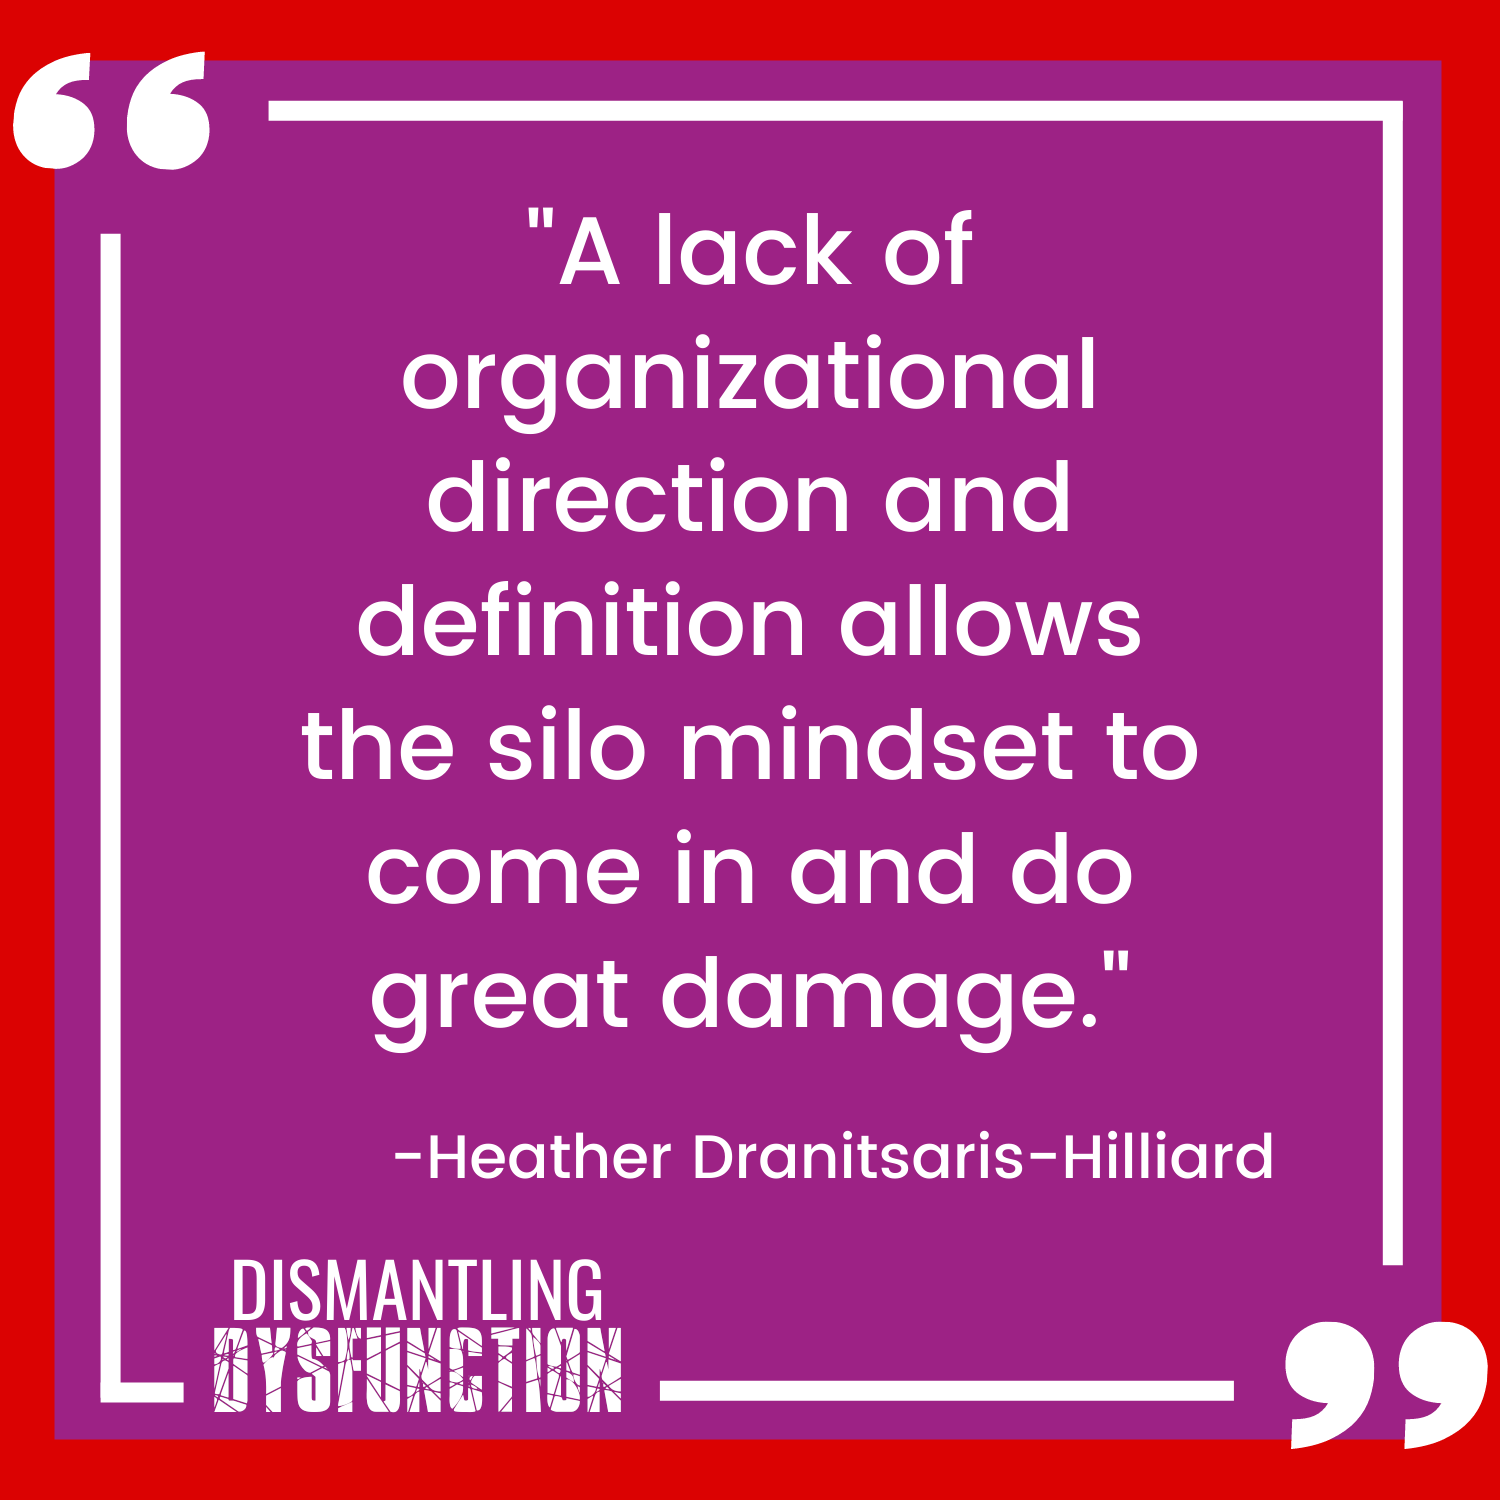 "A lack of organizational direction and definition allows the silo mindset to come in and do great damage."